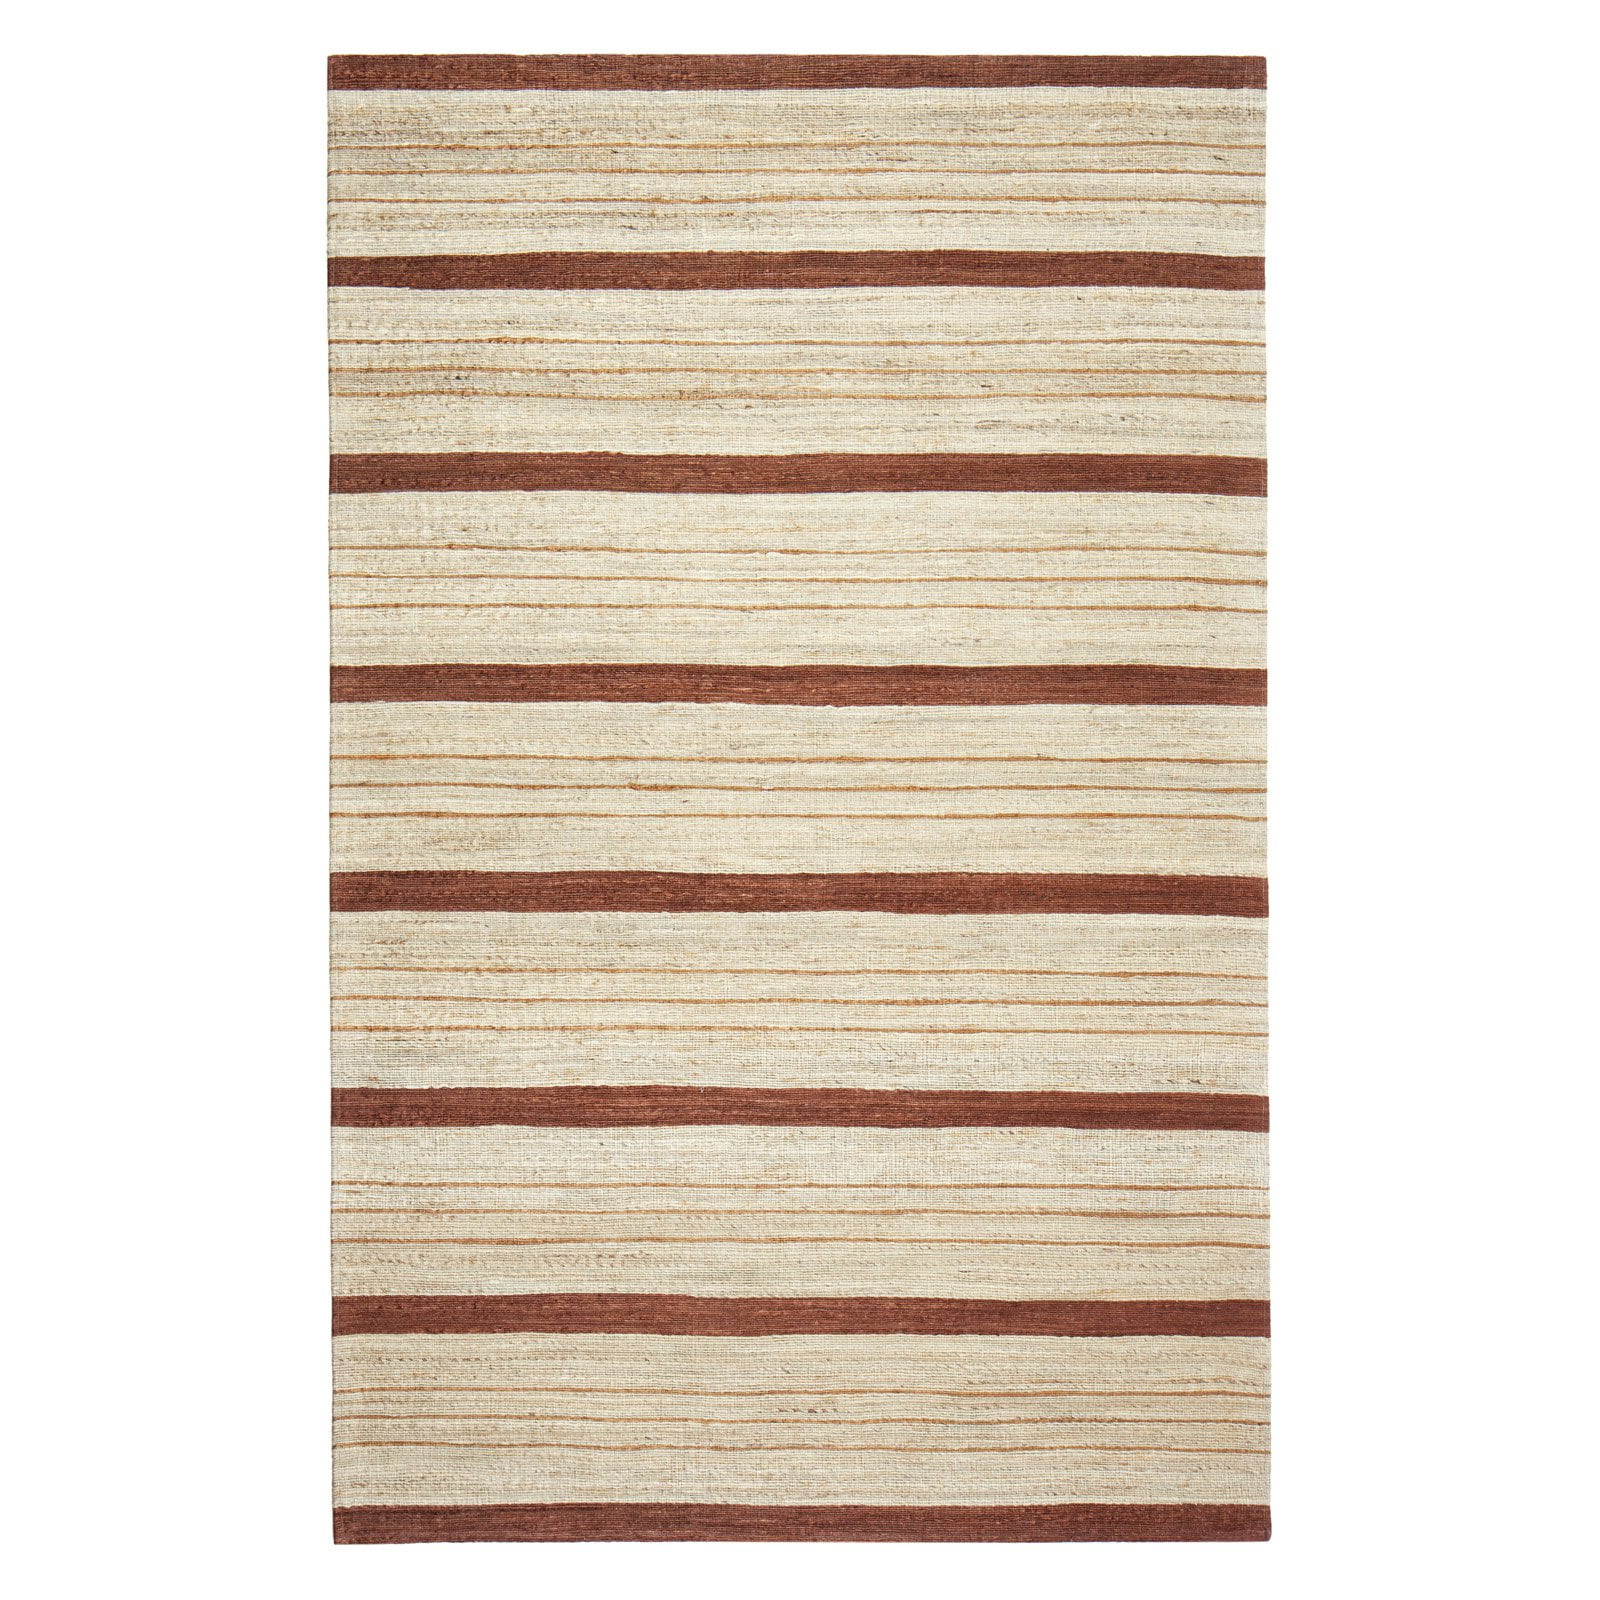 Picture of Anji Mountain AMB0379-0912 9 x 12 ft. Supplication Rectangular Rug - Brown, Rust & Gold